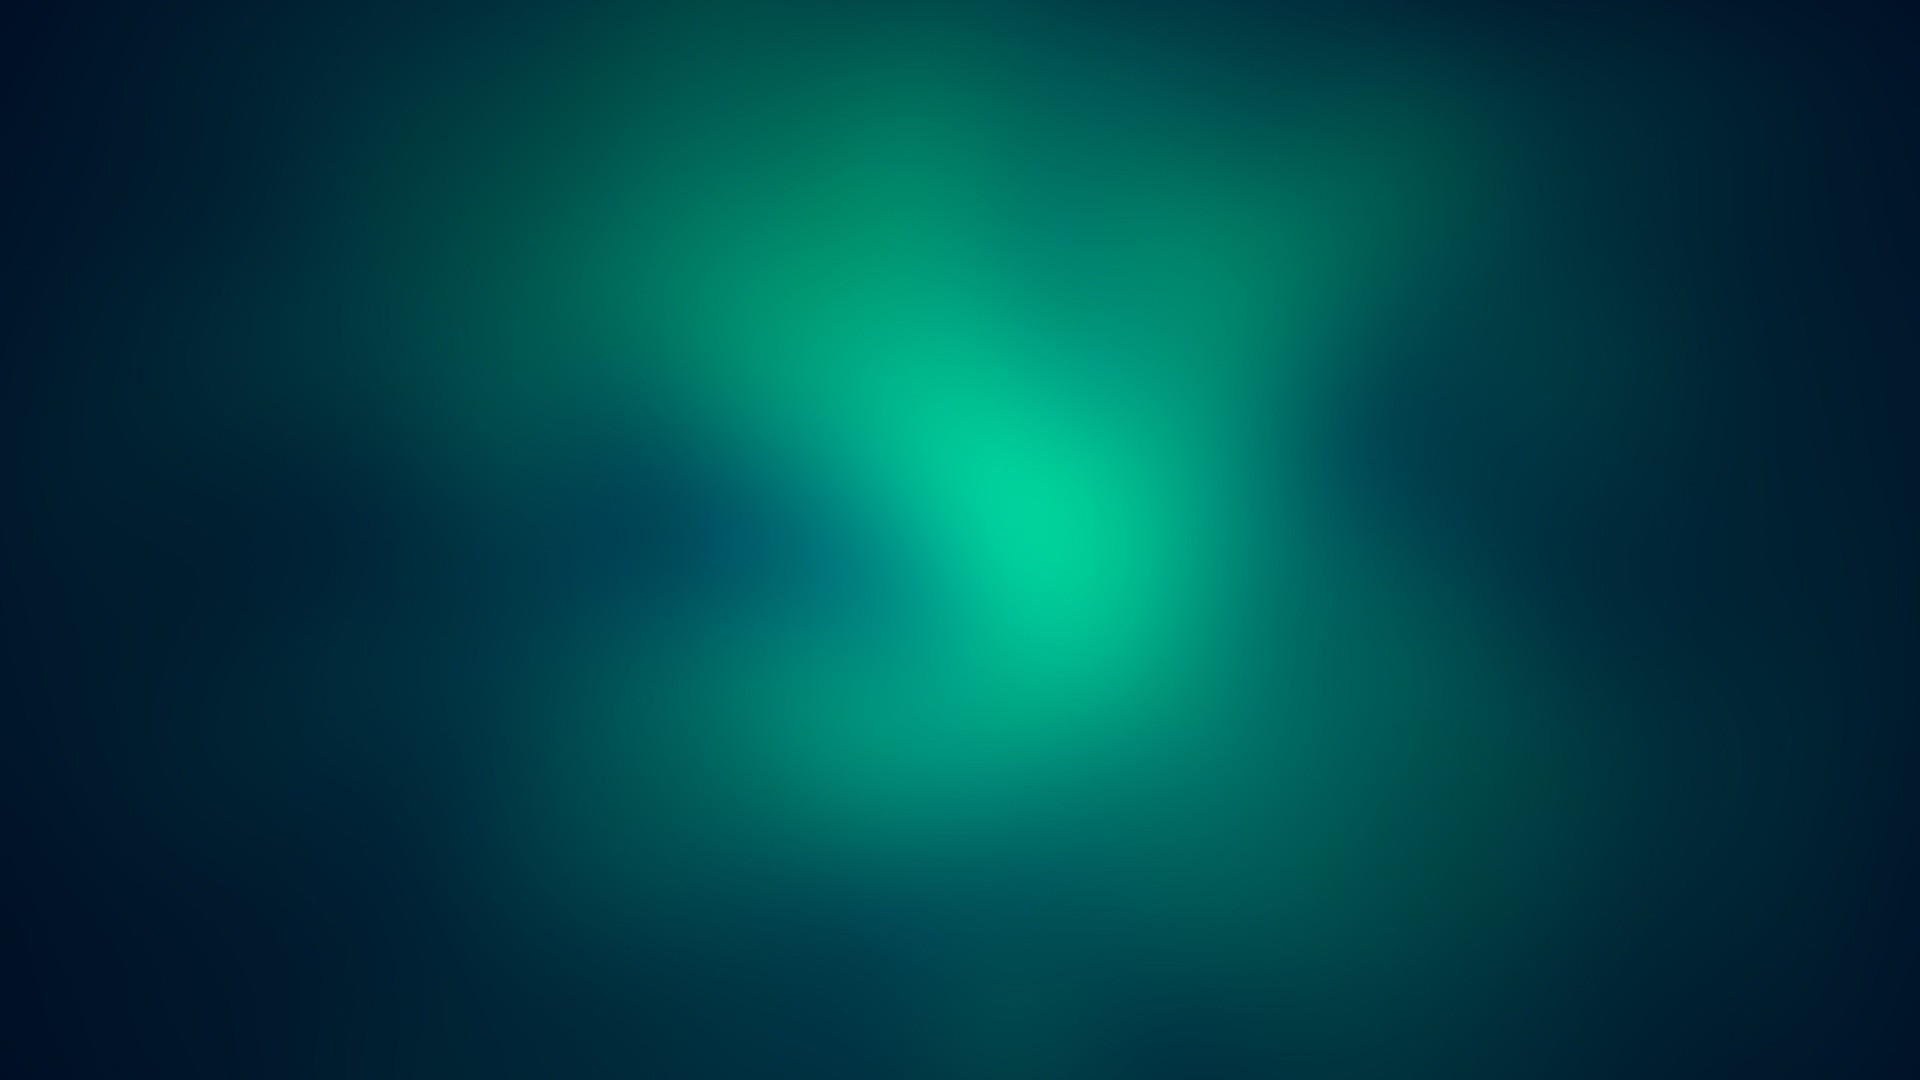 Turquoise Best Widescreen Background HD Wallpaper Of Abstract Vector